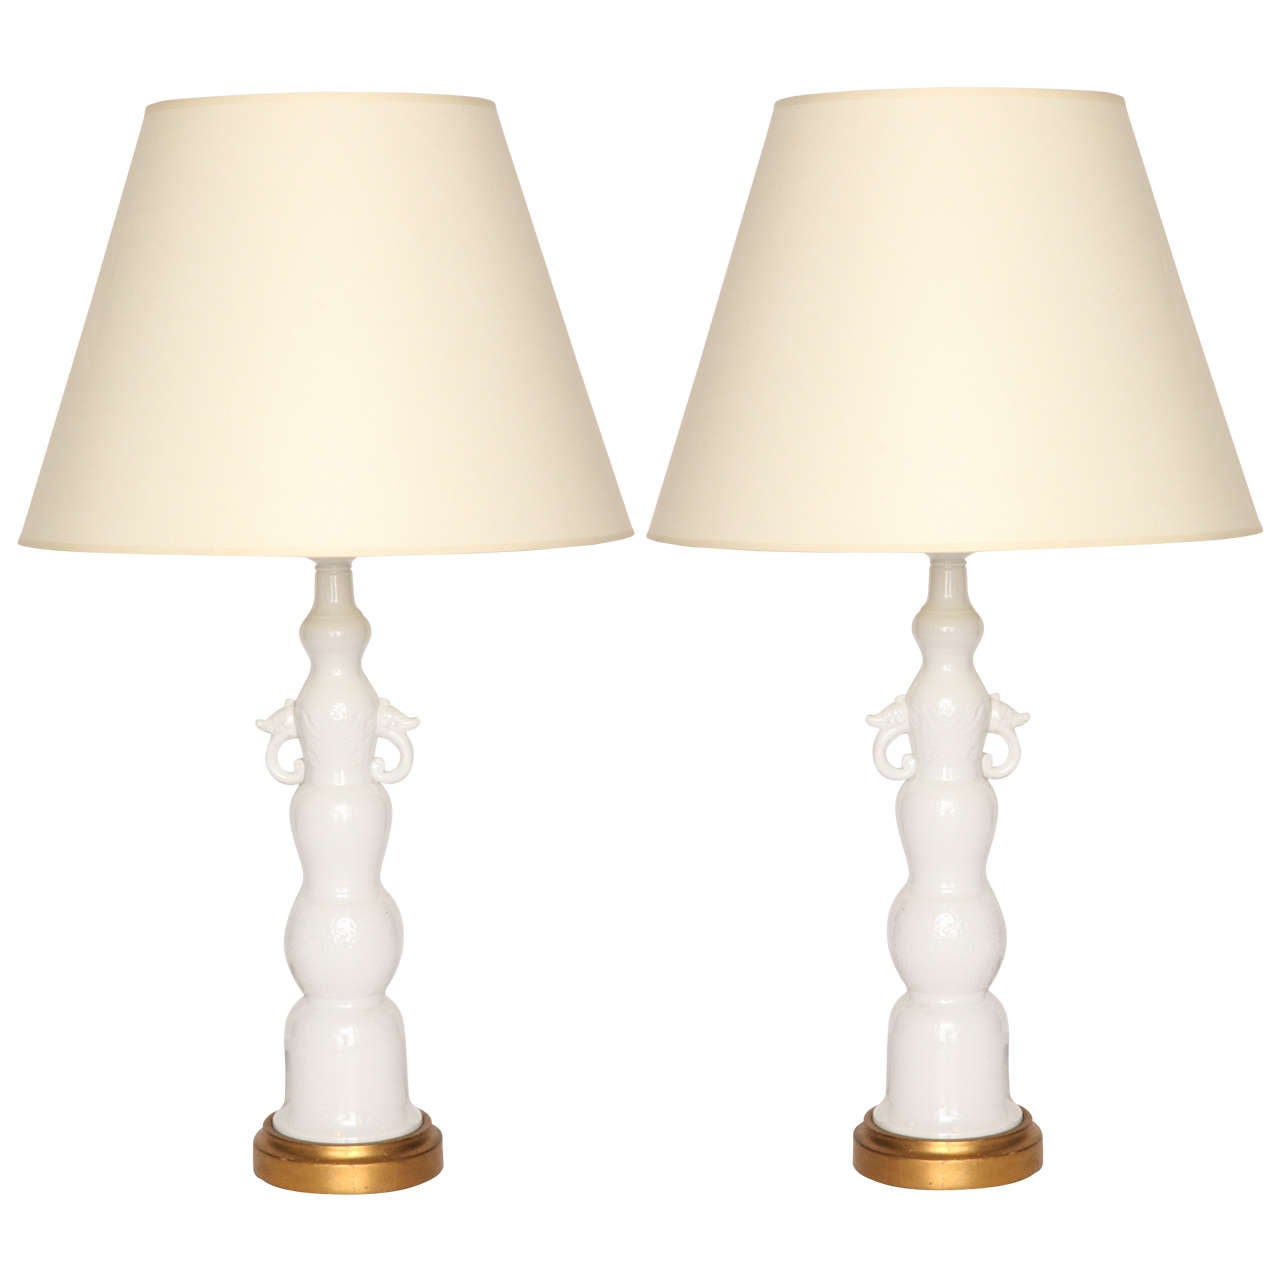 Pair of Glazed Porcelain Table Lamps